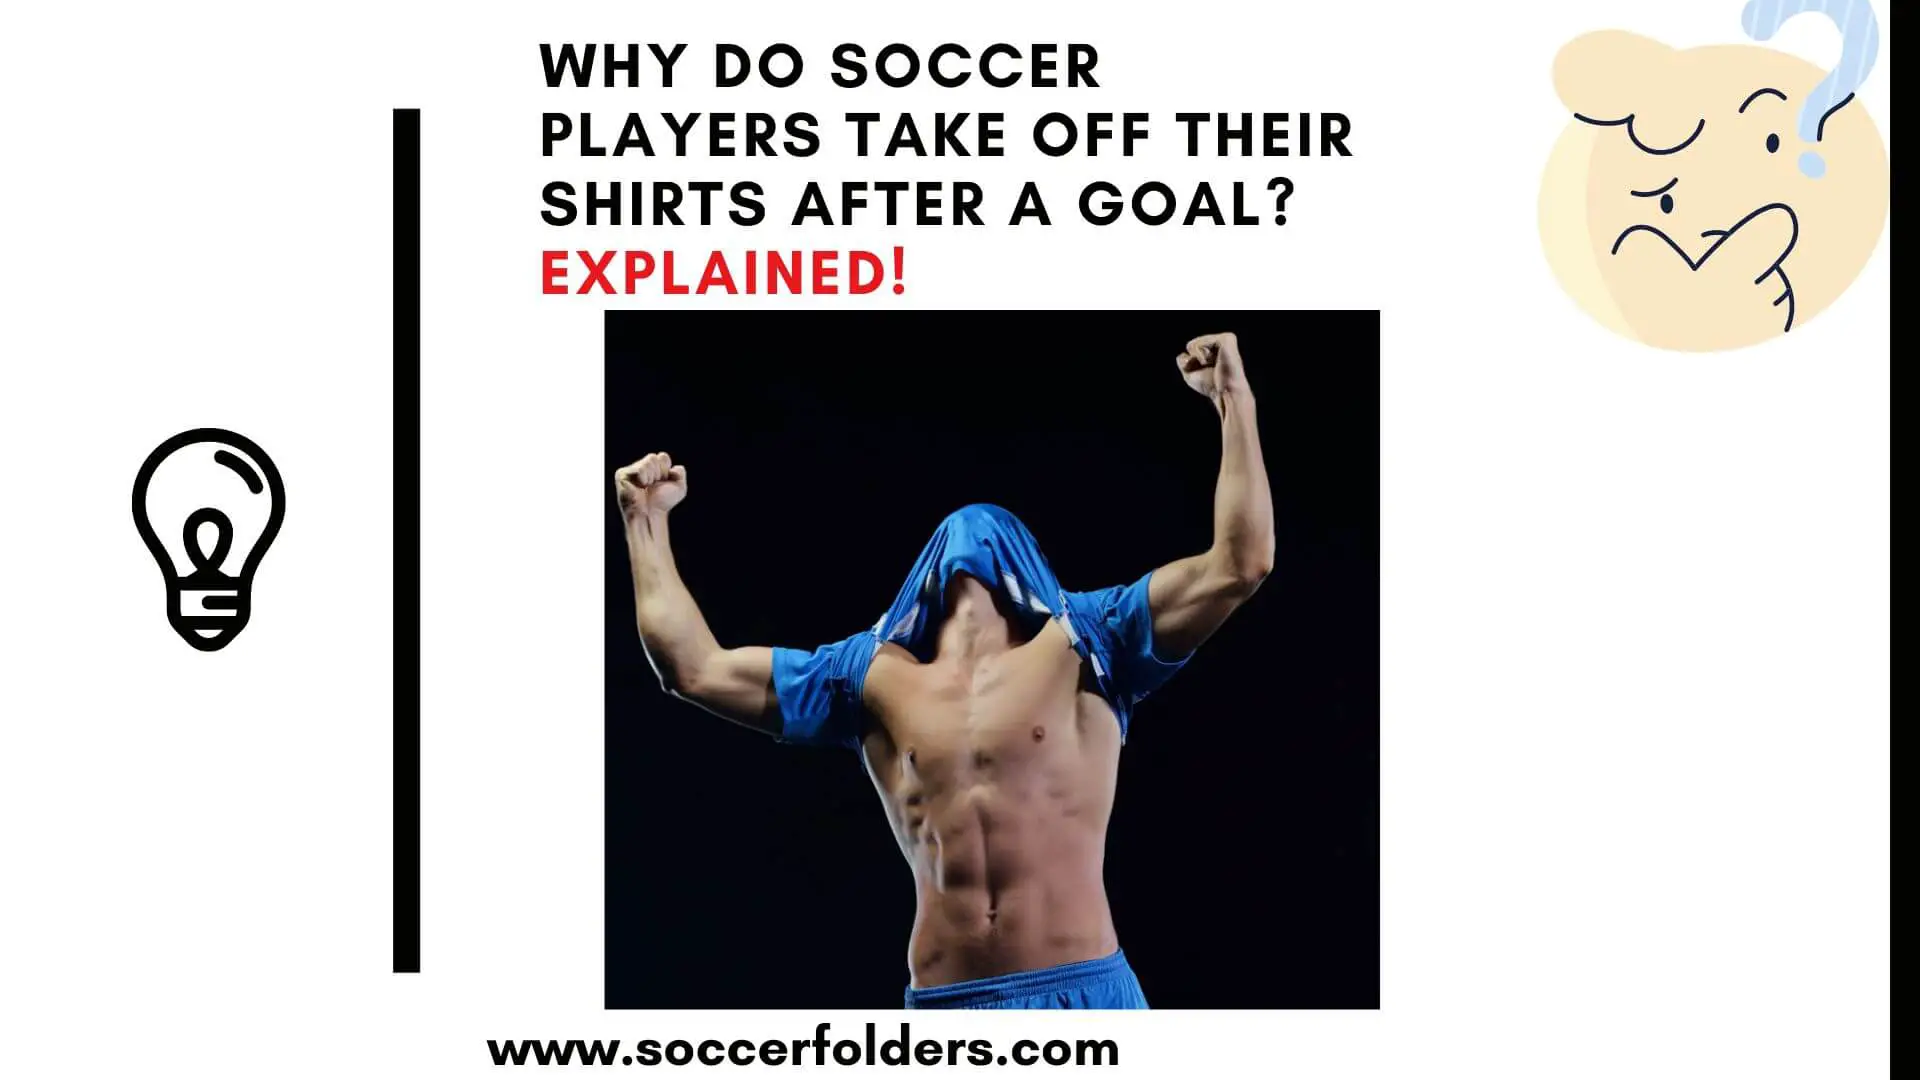 Why do soccer players take off their shirts after a goal - Featured image